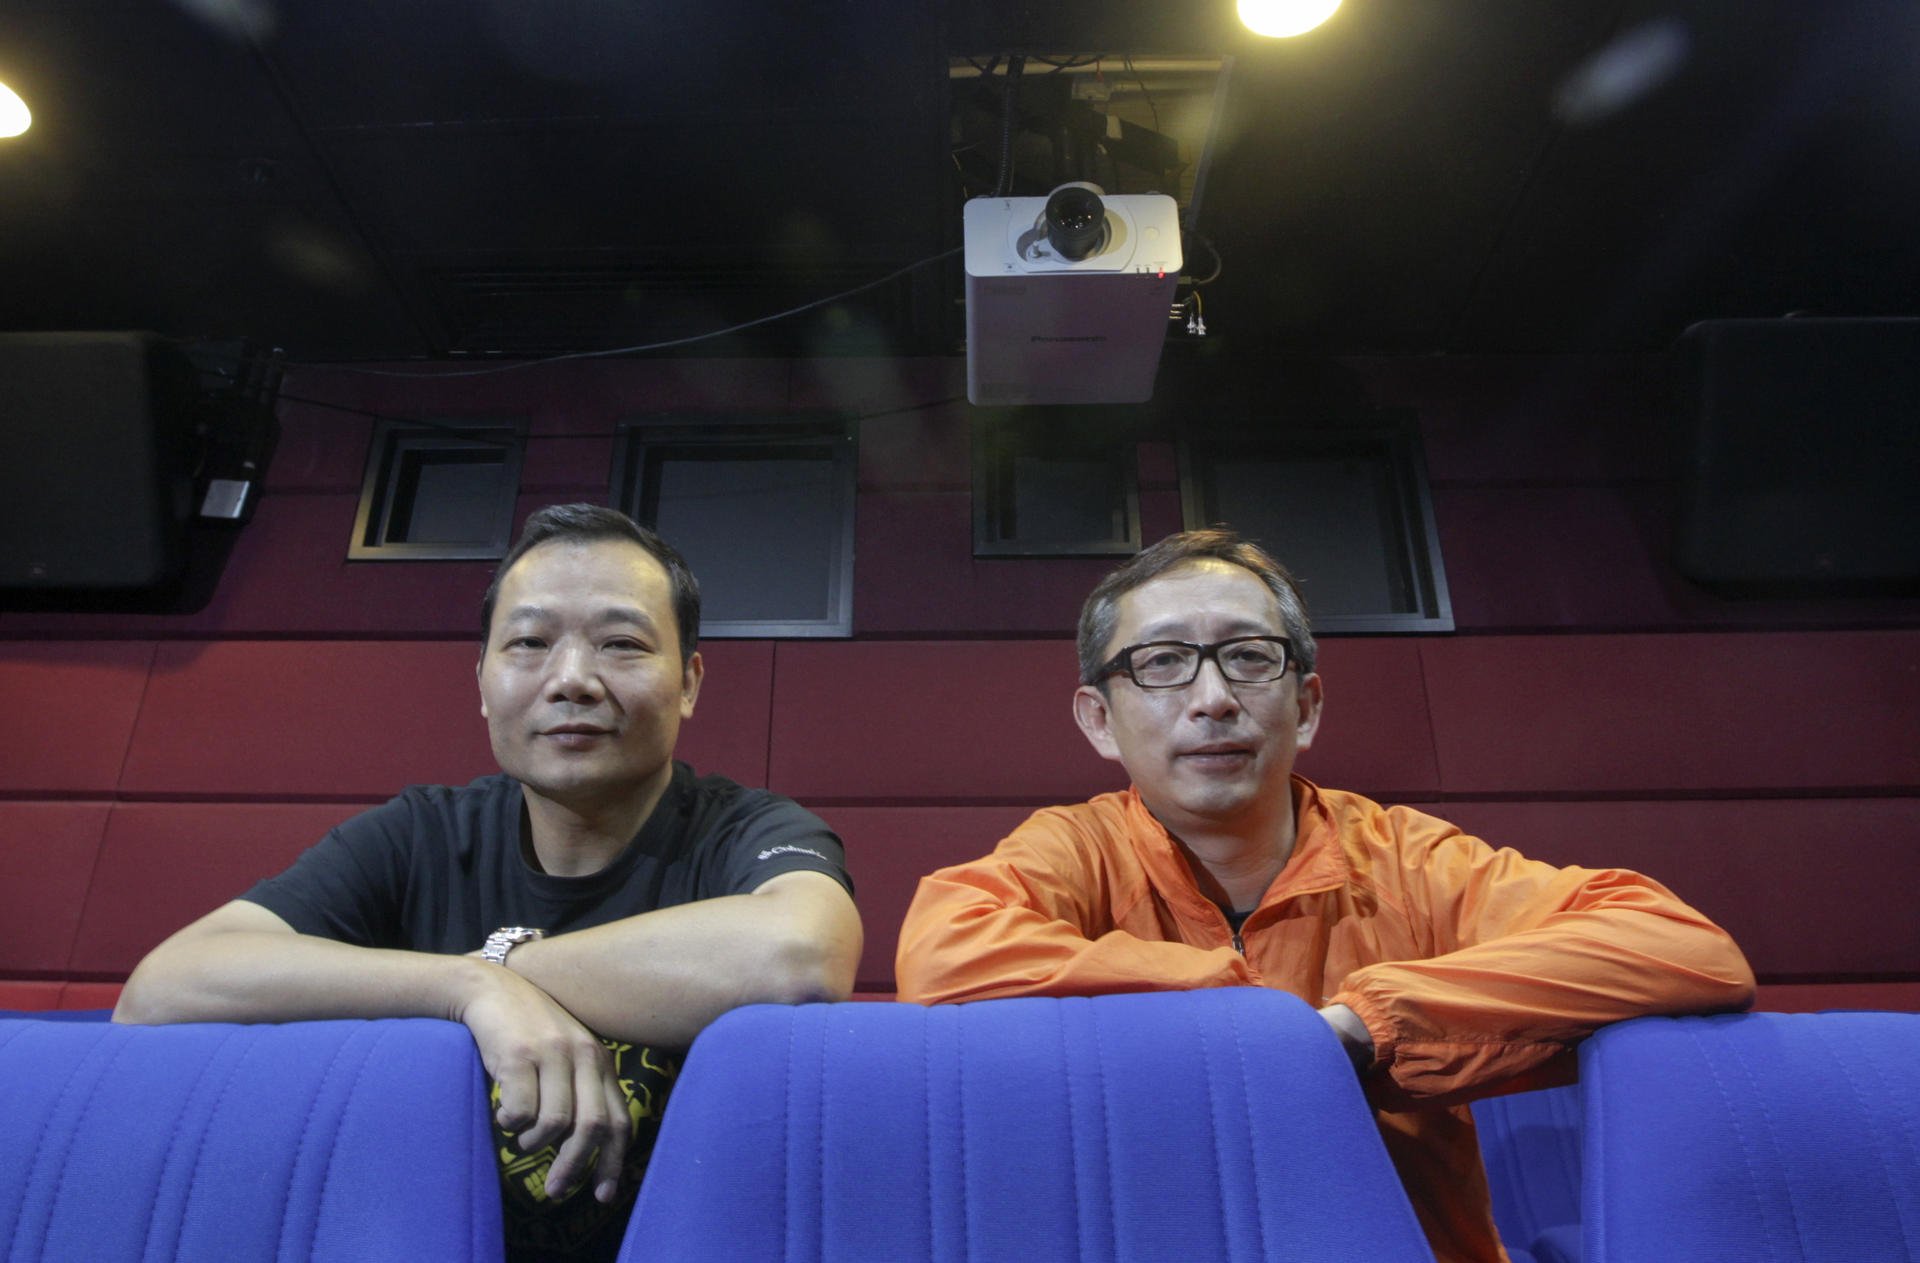 Cinema managers Kwok Yee-kwan (left) and Lee Chi-wai have fond memories of the days of celluloid film projection. Photo: David Wong